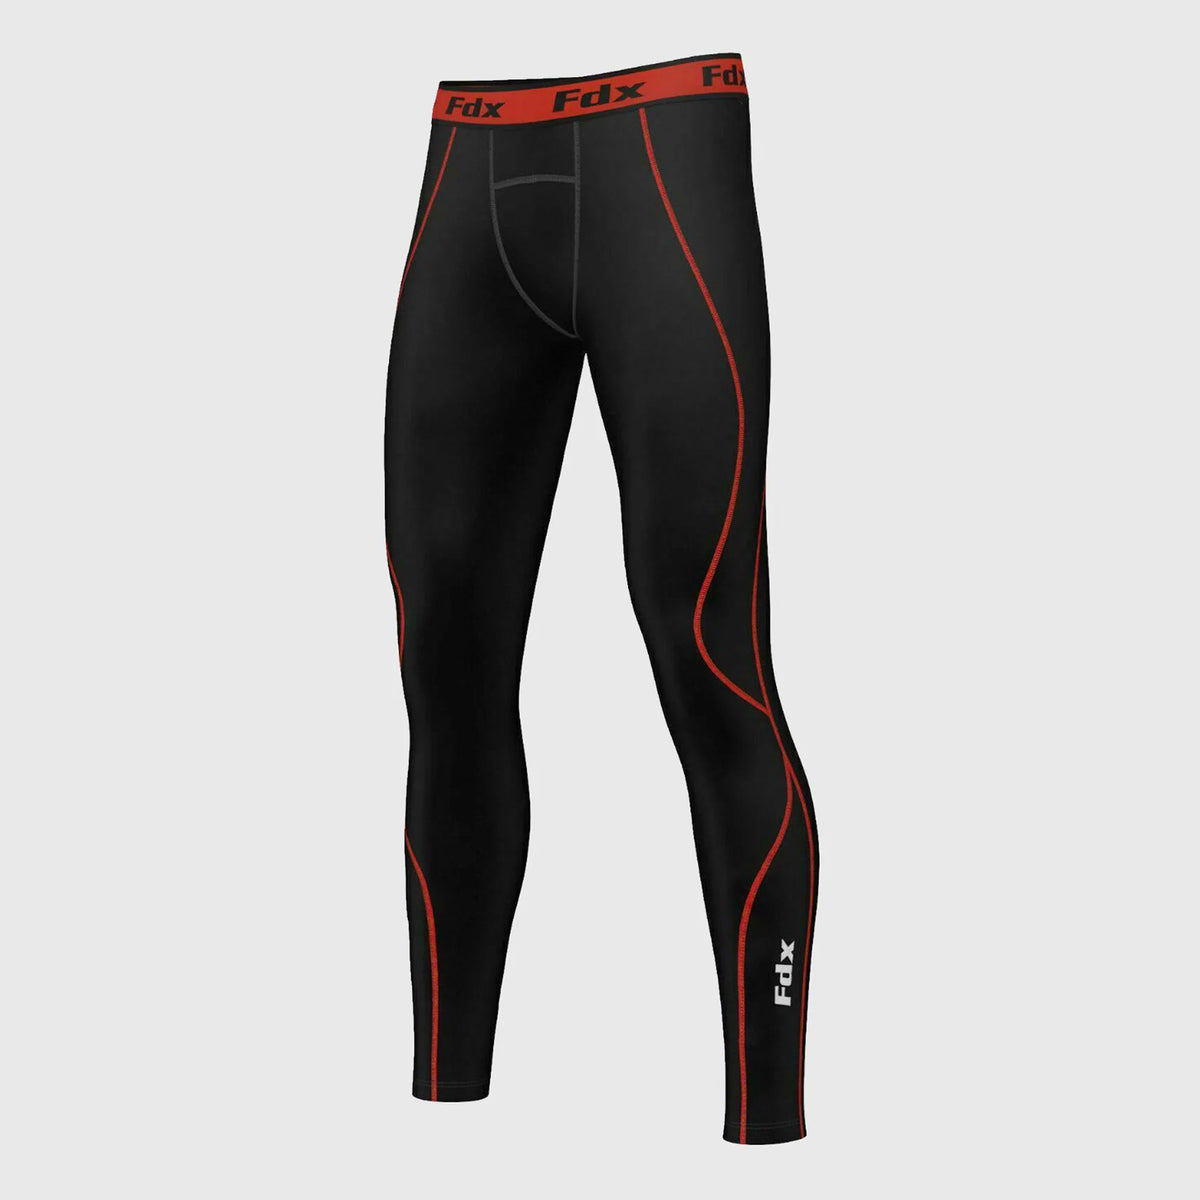 10 Best Compression Leggings For Every Workout Type, Per Reviews